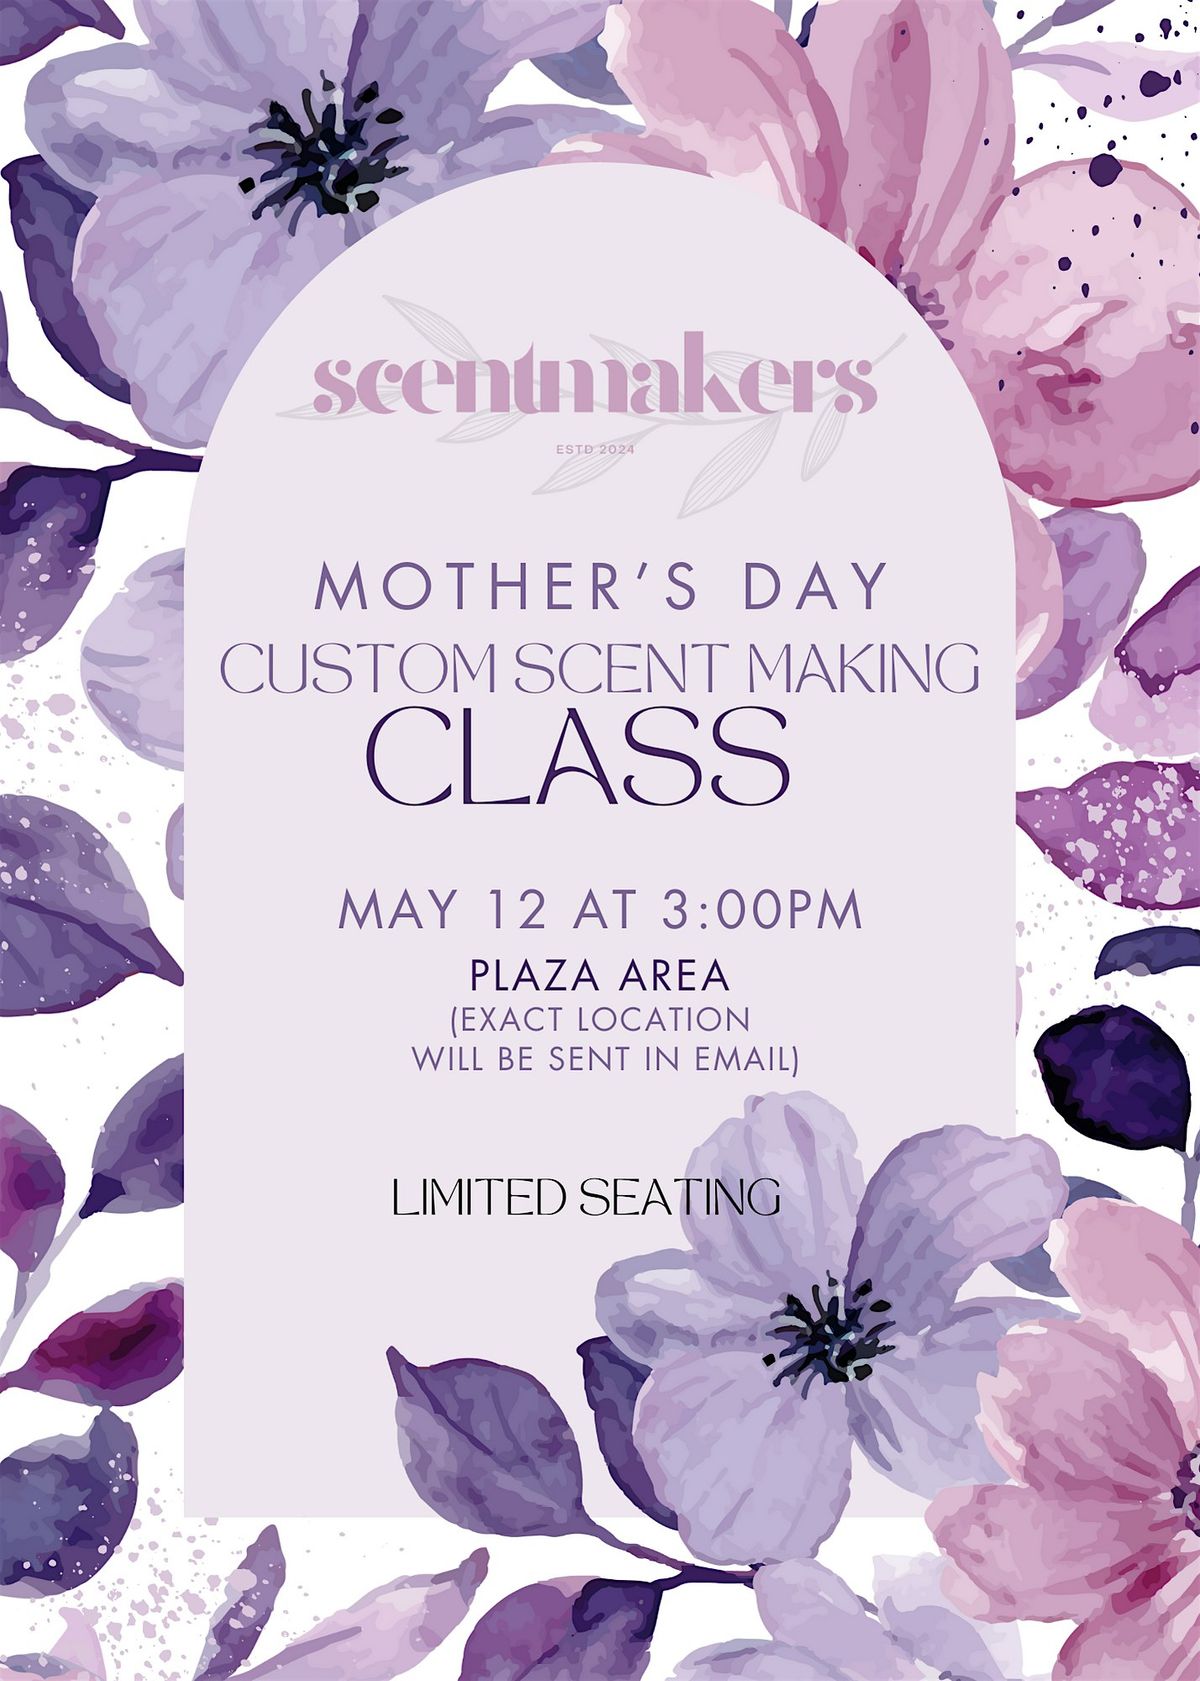 Special Mother's Day Custom Scent Making Class